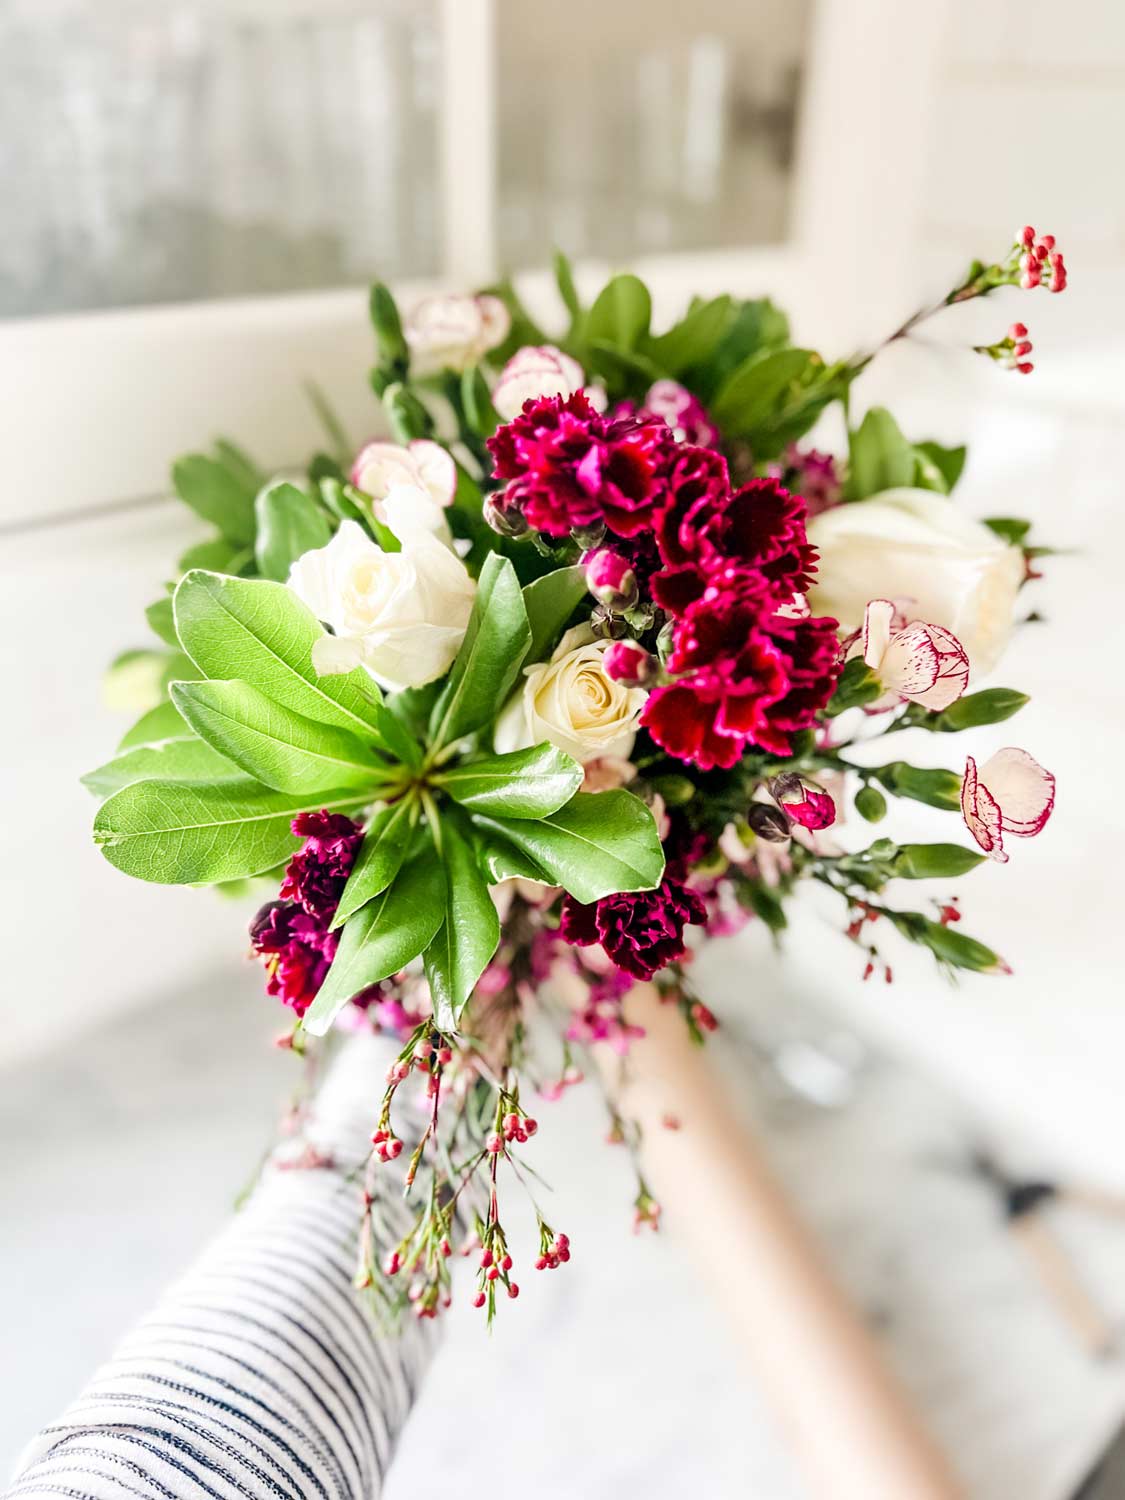 Spread Some Surprise Love - How to Wrap A Mini-Bouquet of Thanks DIY